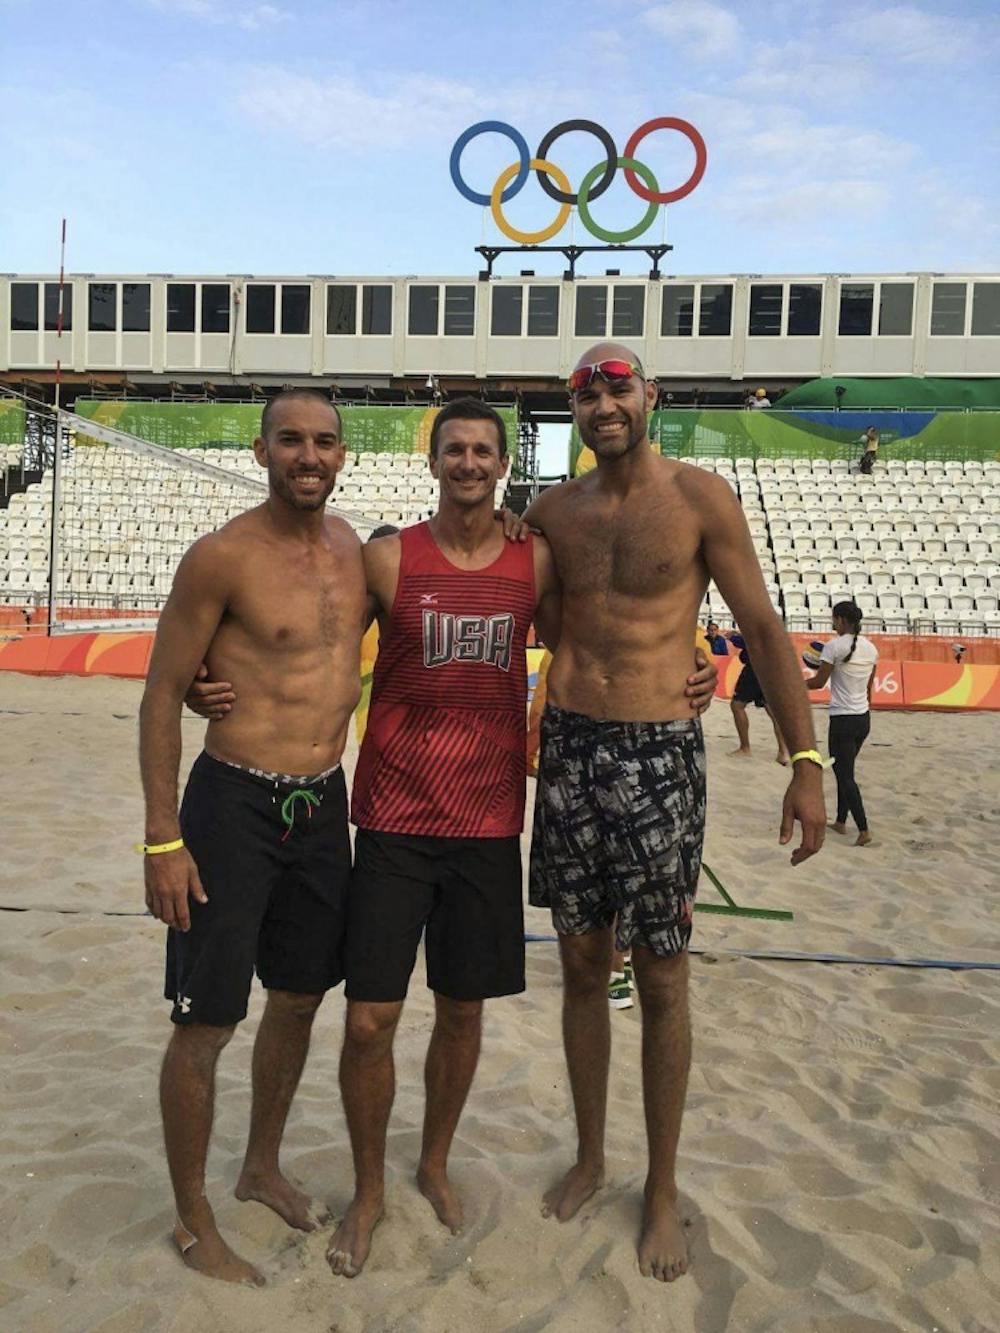 Paul Baxter made his Olympic Games coaching debut as the head coach for beach volleyball players Phil Dalhausser and Nick Lucena on the men’s side. Baxter also coached Lauren Fendrick and Brooke Sweat on the women’s side. Photo Provided // Paul Baxter